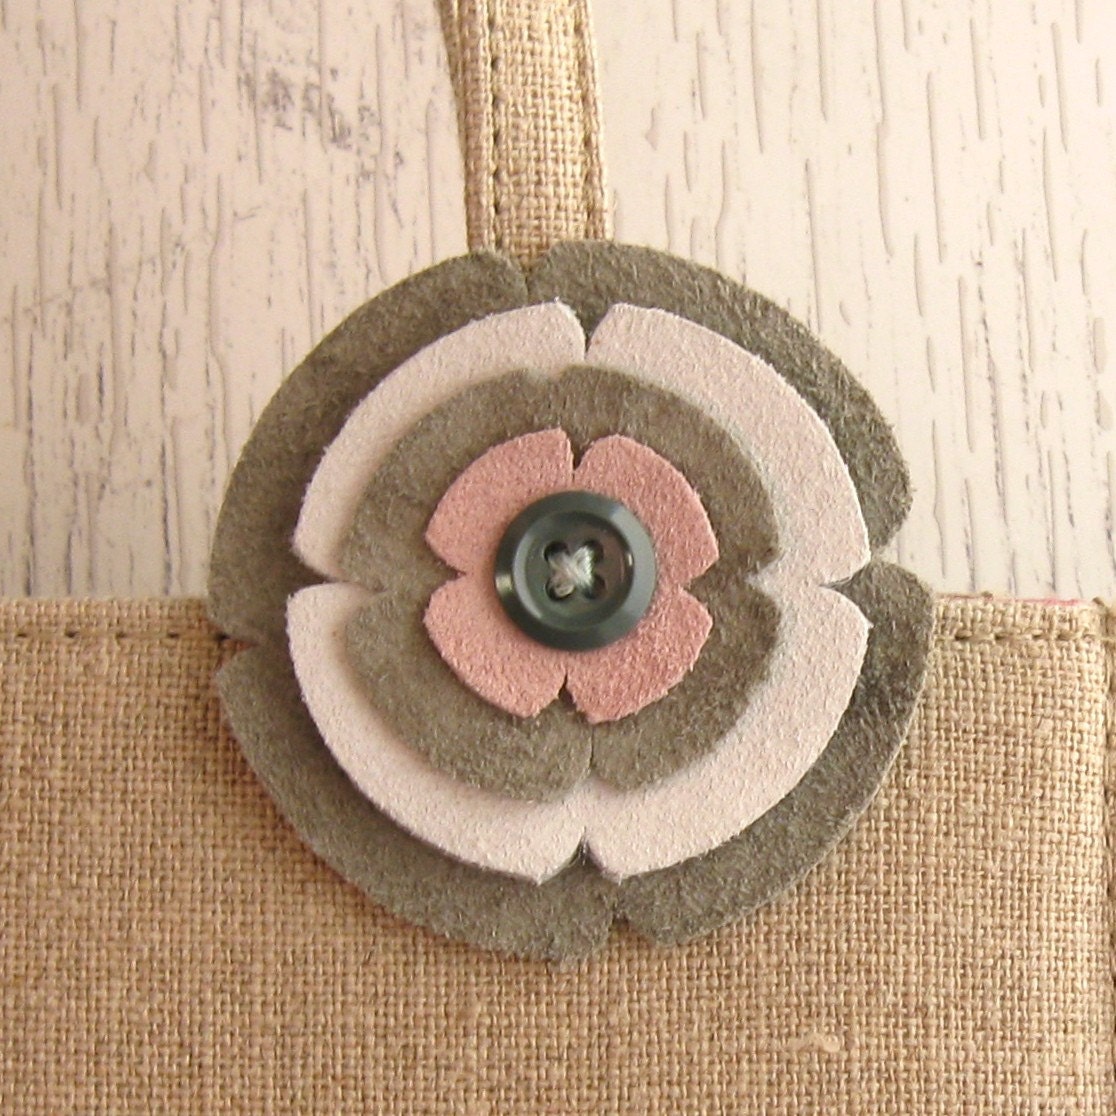 Spring Flower Handmade Leather Brooch in Pink and Grey